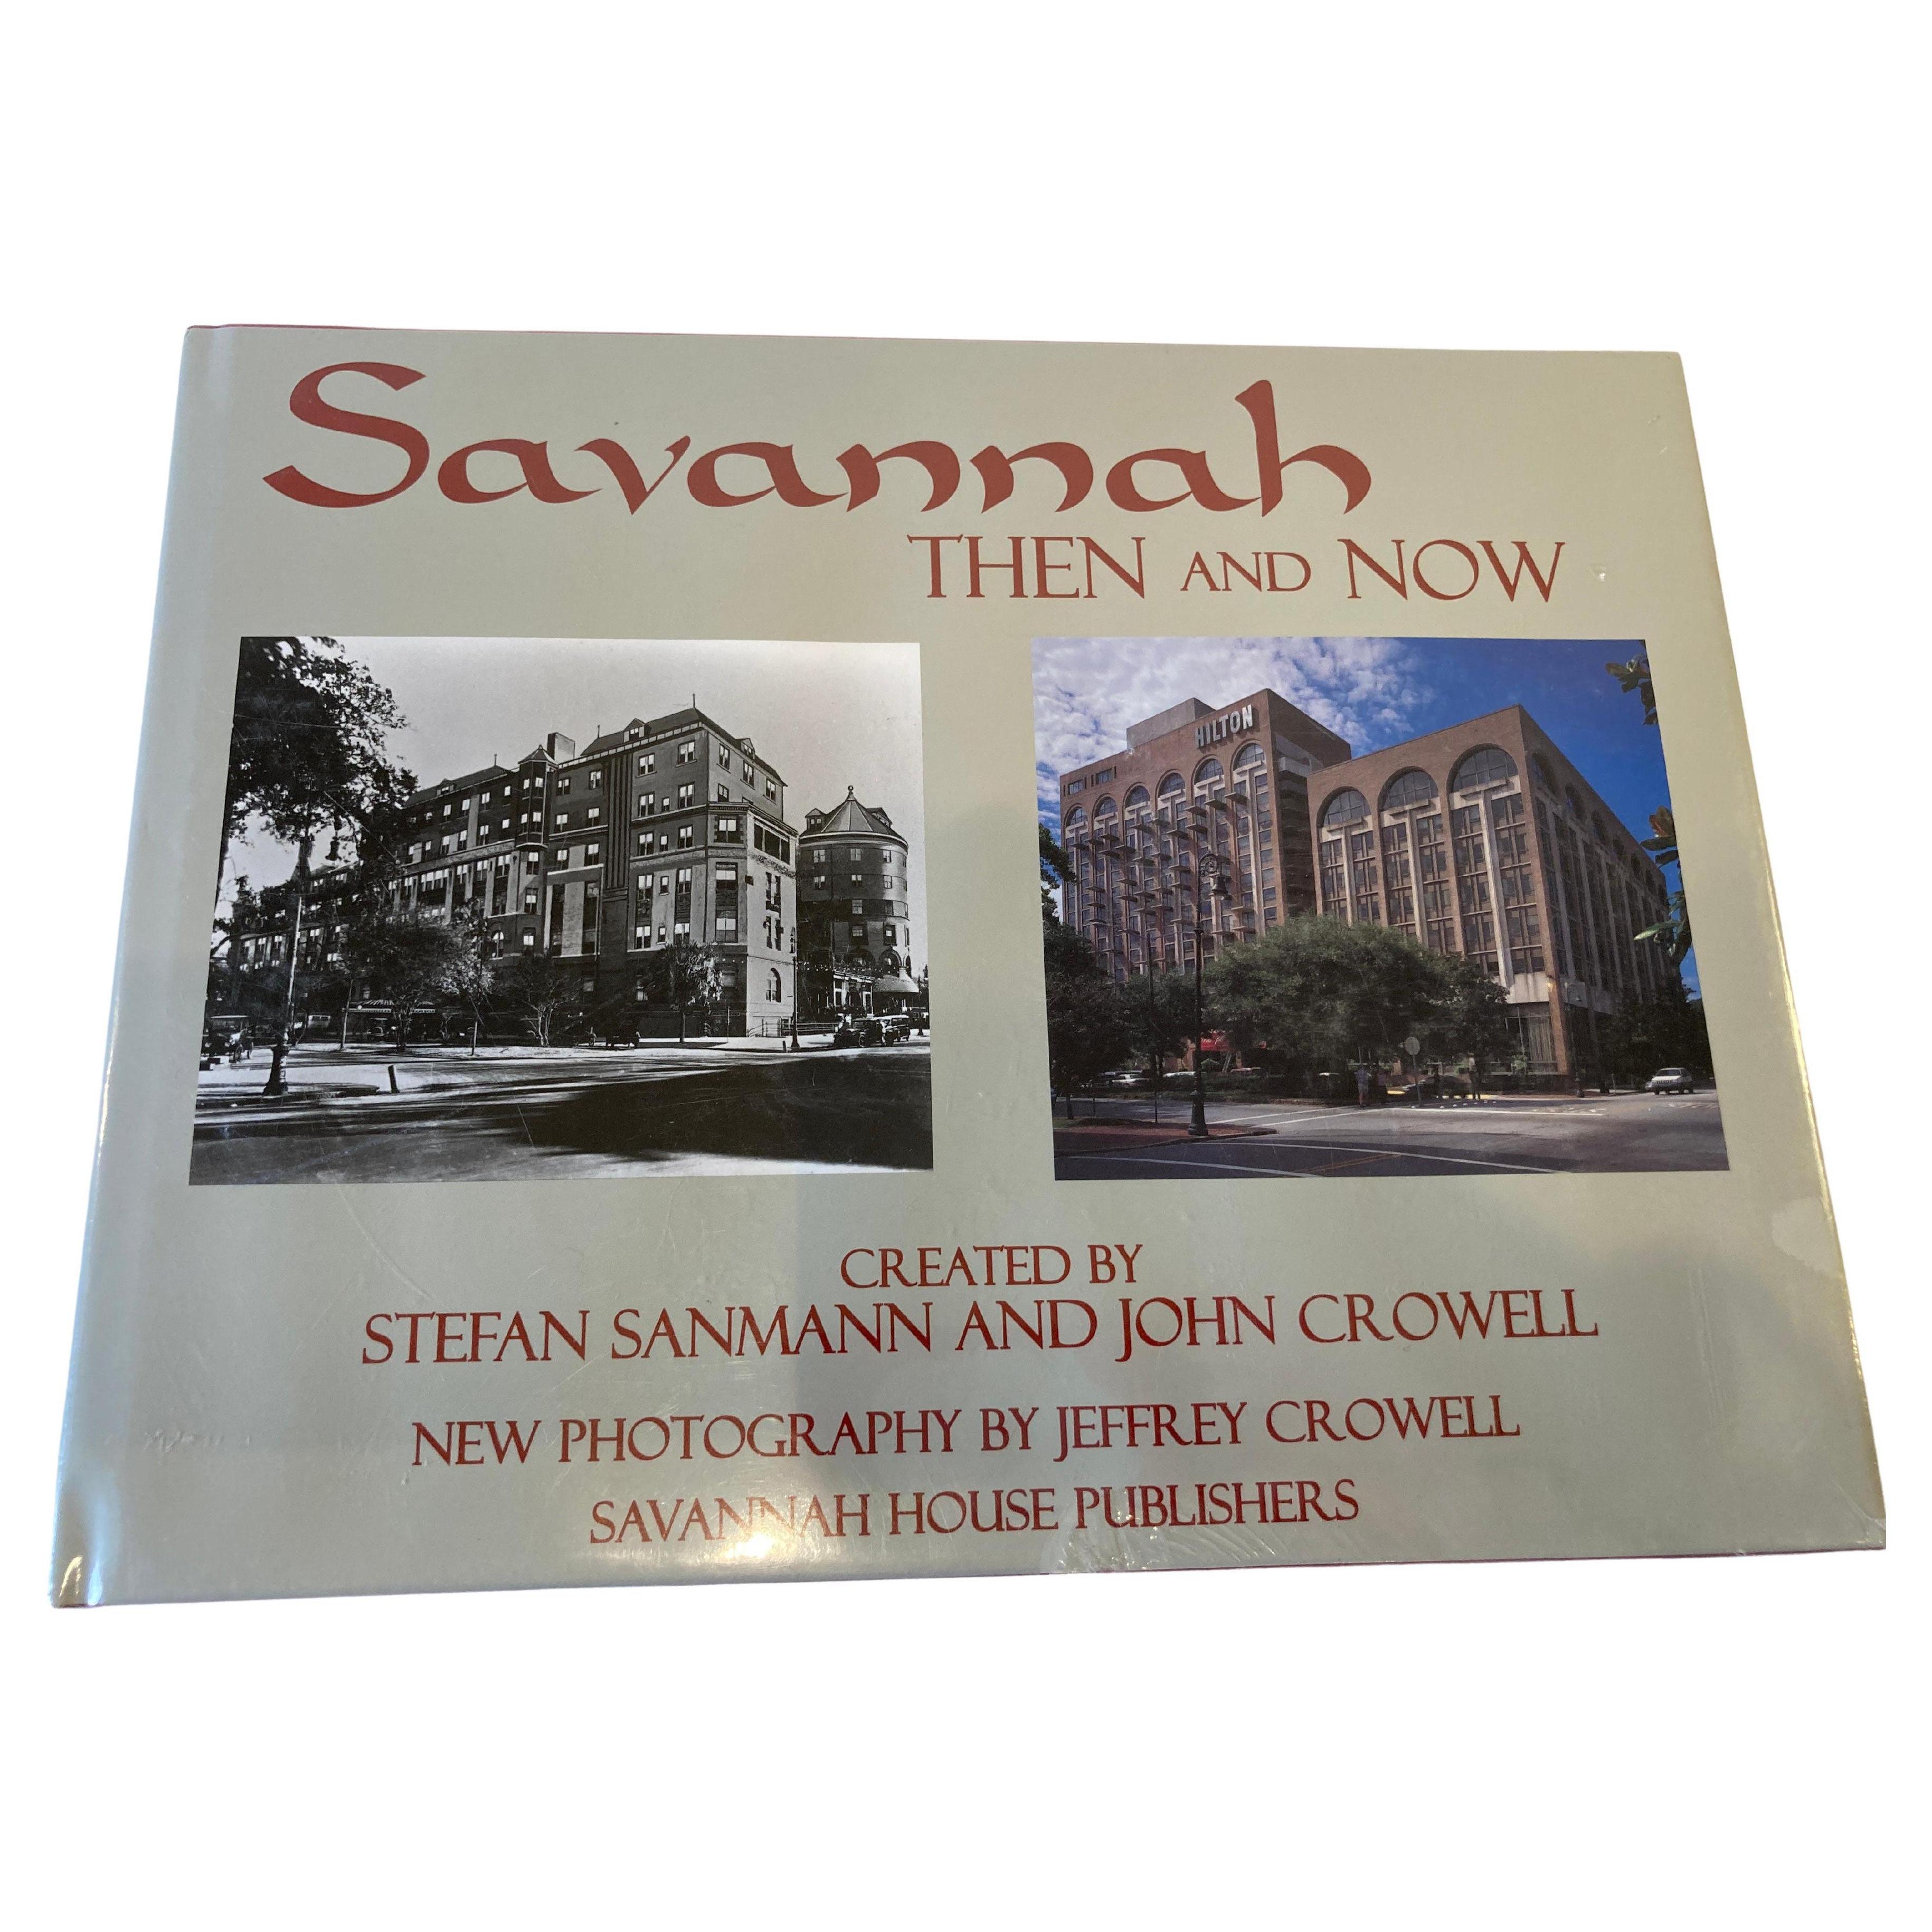 Savannah Then and Now by Stefan Sanmann and John Crowell Hardcover Book.
Savannah: Then and Now Hardcover – January 1, 1997
by Stefan Sanmann (Author), John Crowell (Author), Jeffrey Crowell (Photographer)
Photography - 172 pages
Putting archive